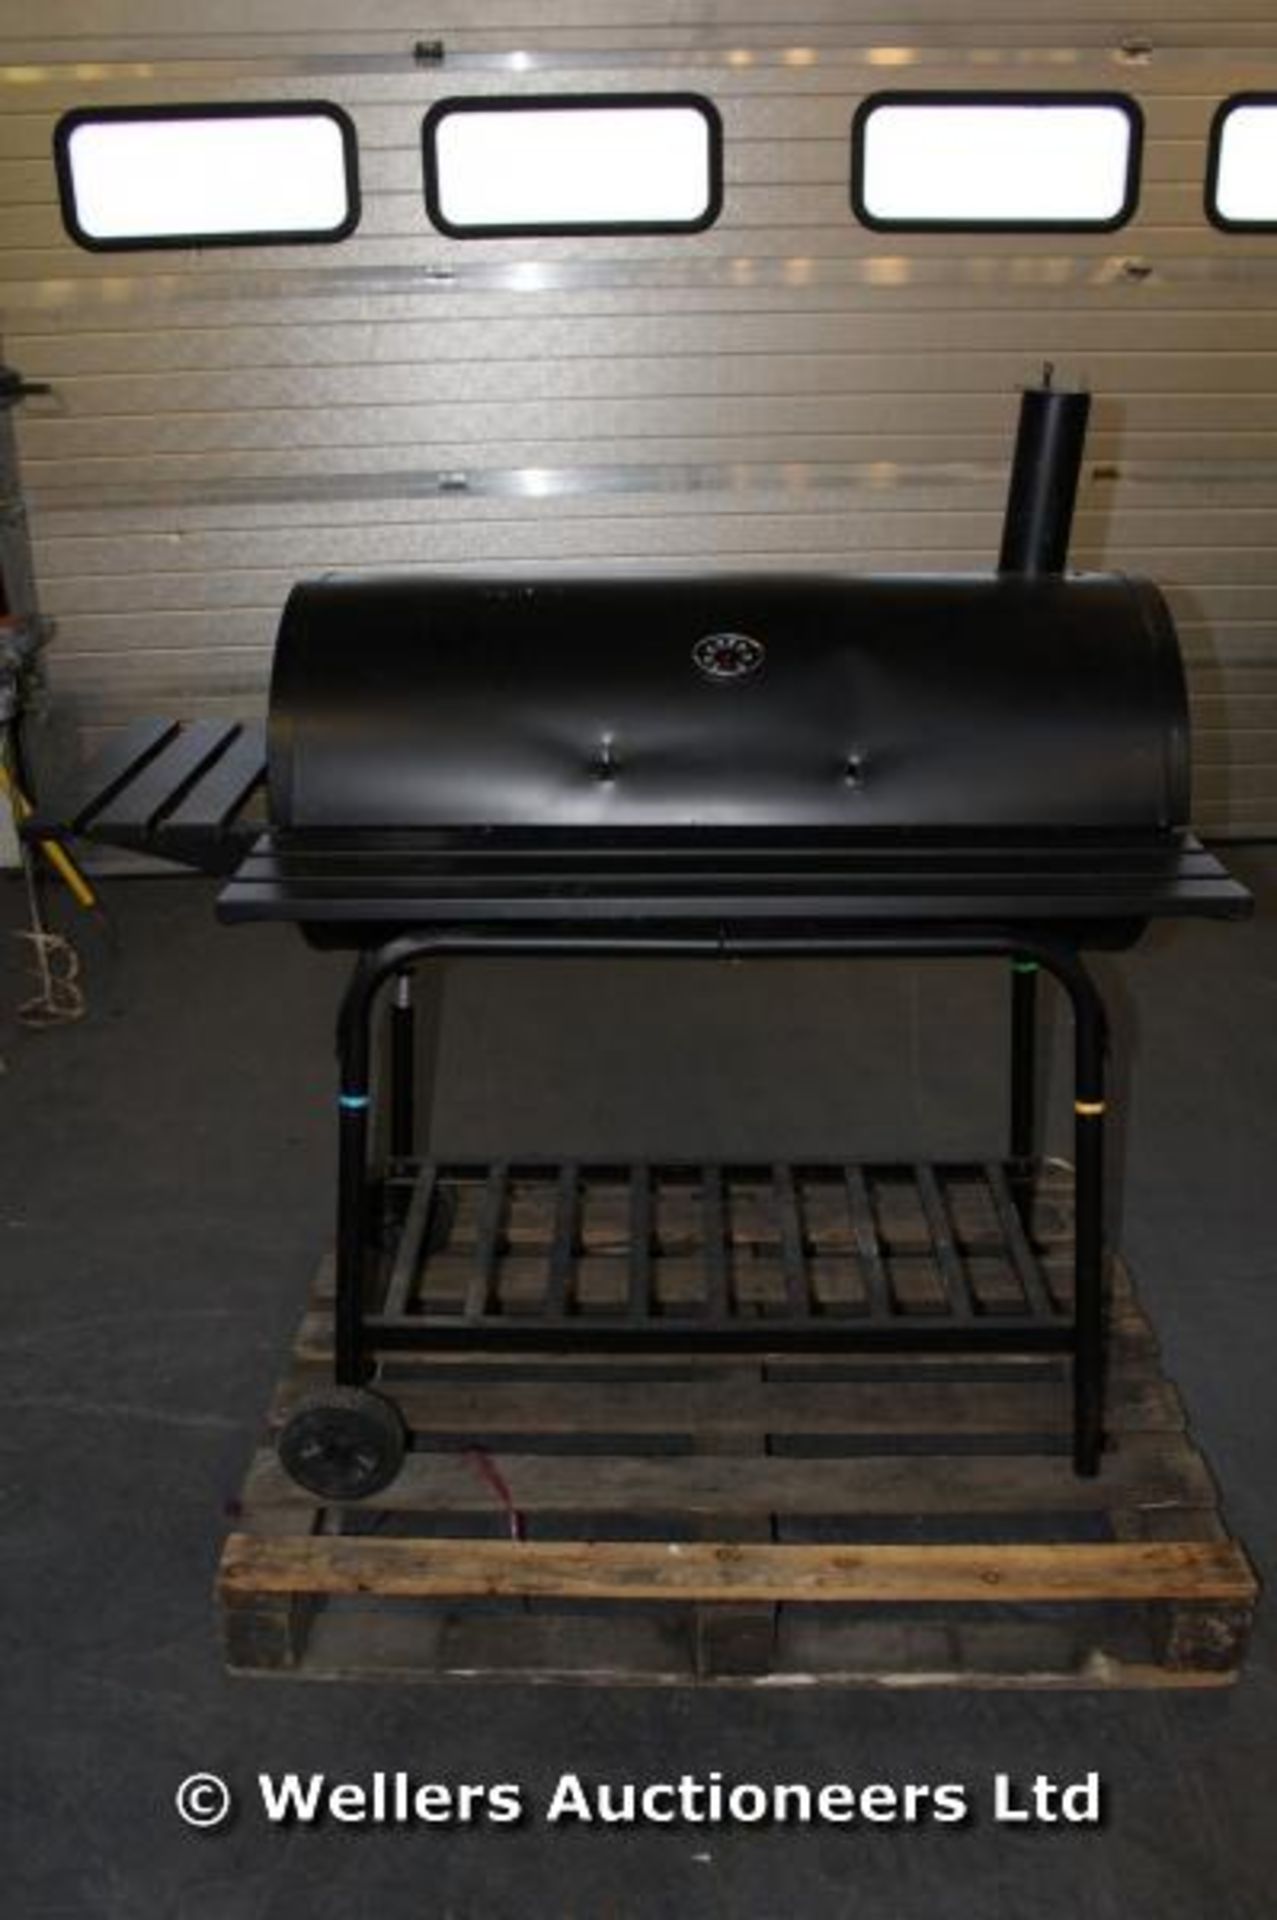 PALLET OF SELF STORAGE UNIT TO BE SOLD INCLUDING LARGE CHARCOAL BBQ, INDUSTRIAL MIXER DRILL, MIXED